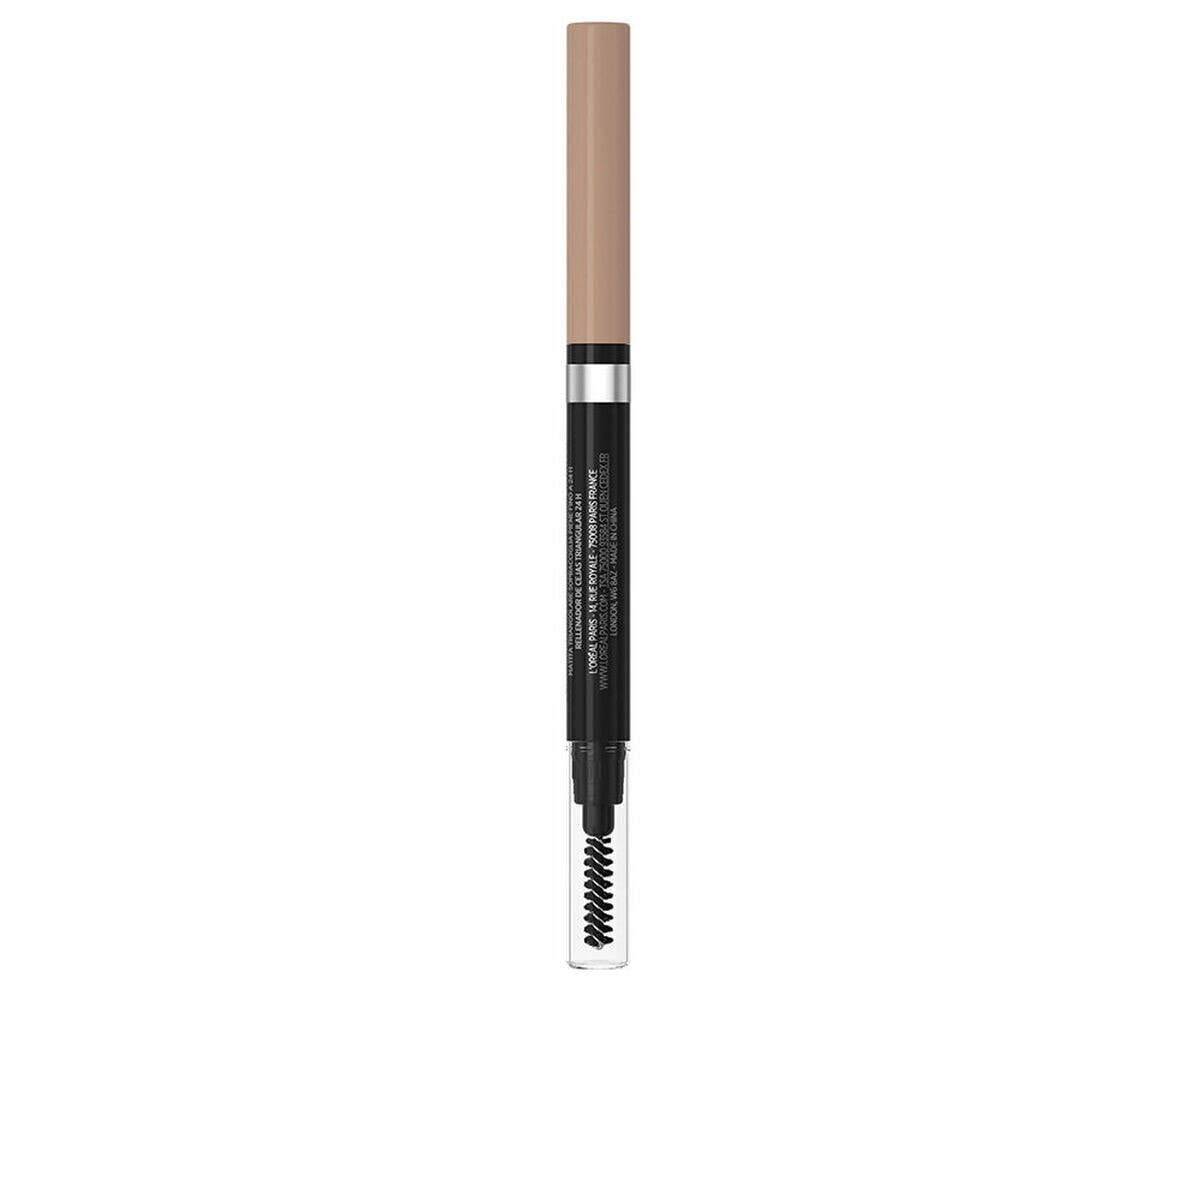 Eyebrow Pencil L'Oreal Make Up Infaillible Brows 24H Nº 6.0-dark blonde (1 ml)